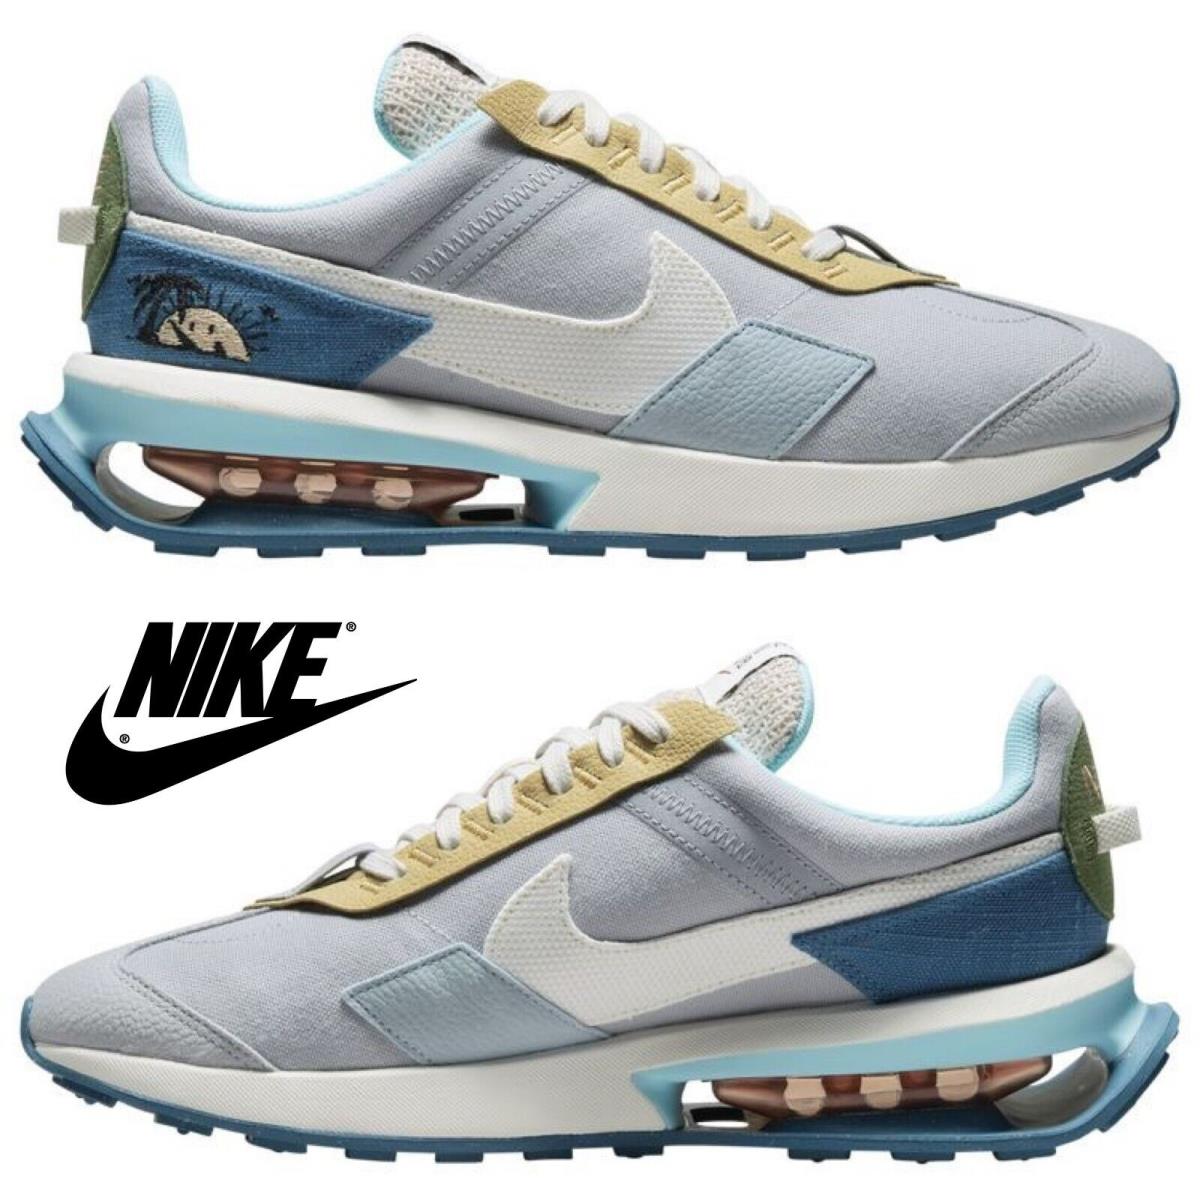 Nike Air Max Pre-day Men`s Sneakers Comfort Casual Sport Shoes Blue Gray